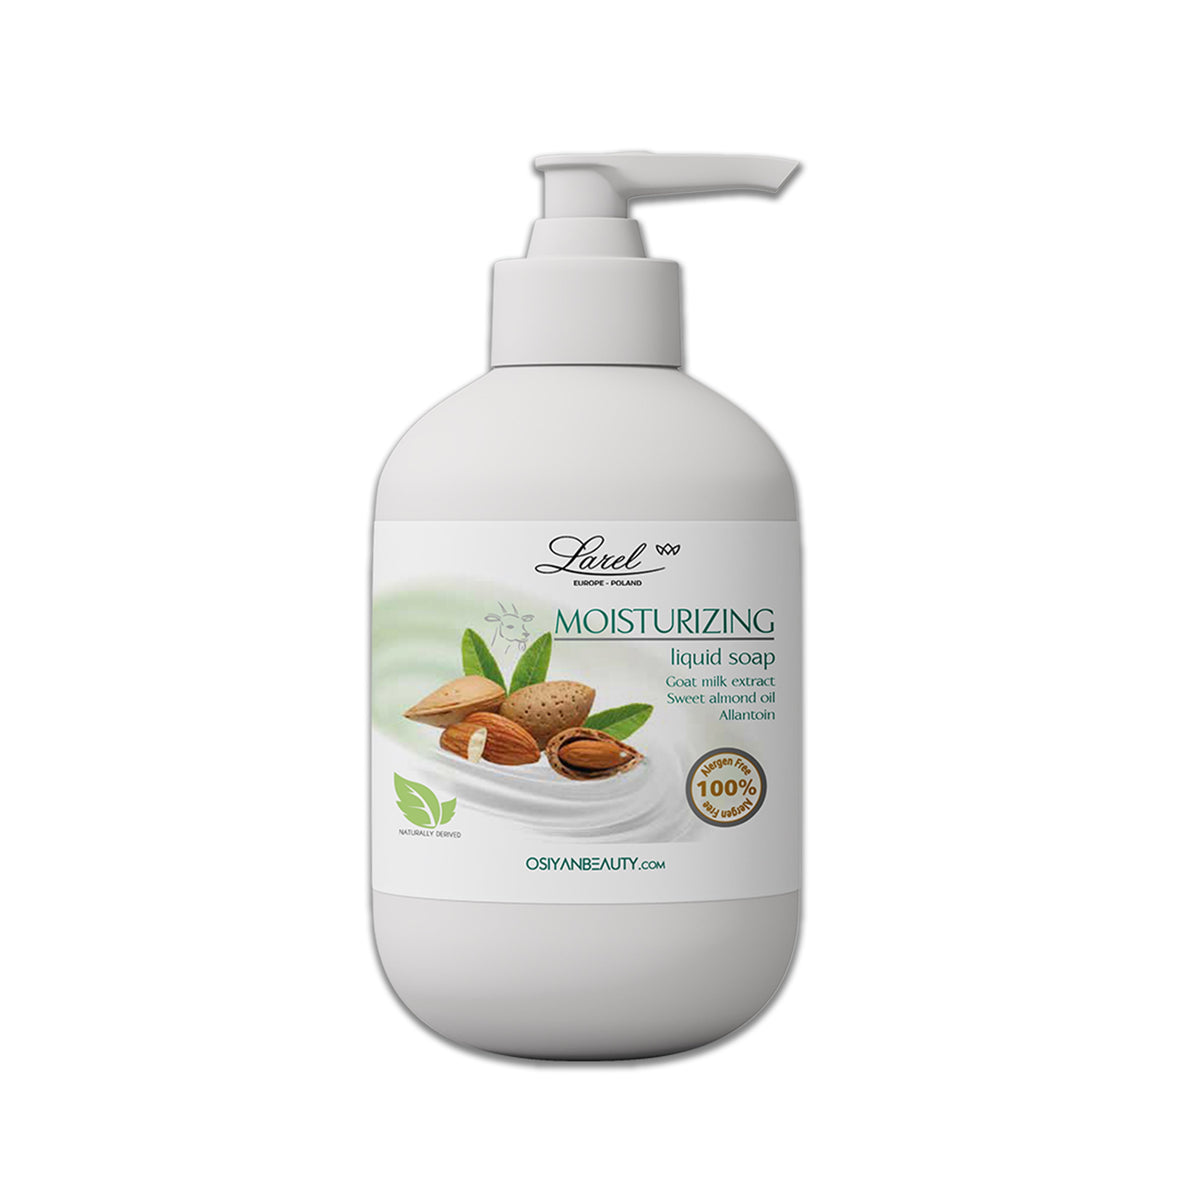 Liquid soap with goat milk & sweet almond oil Moisturizing (made in Europe)